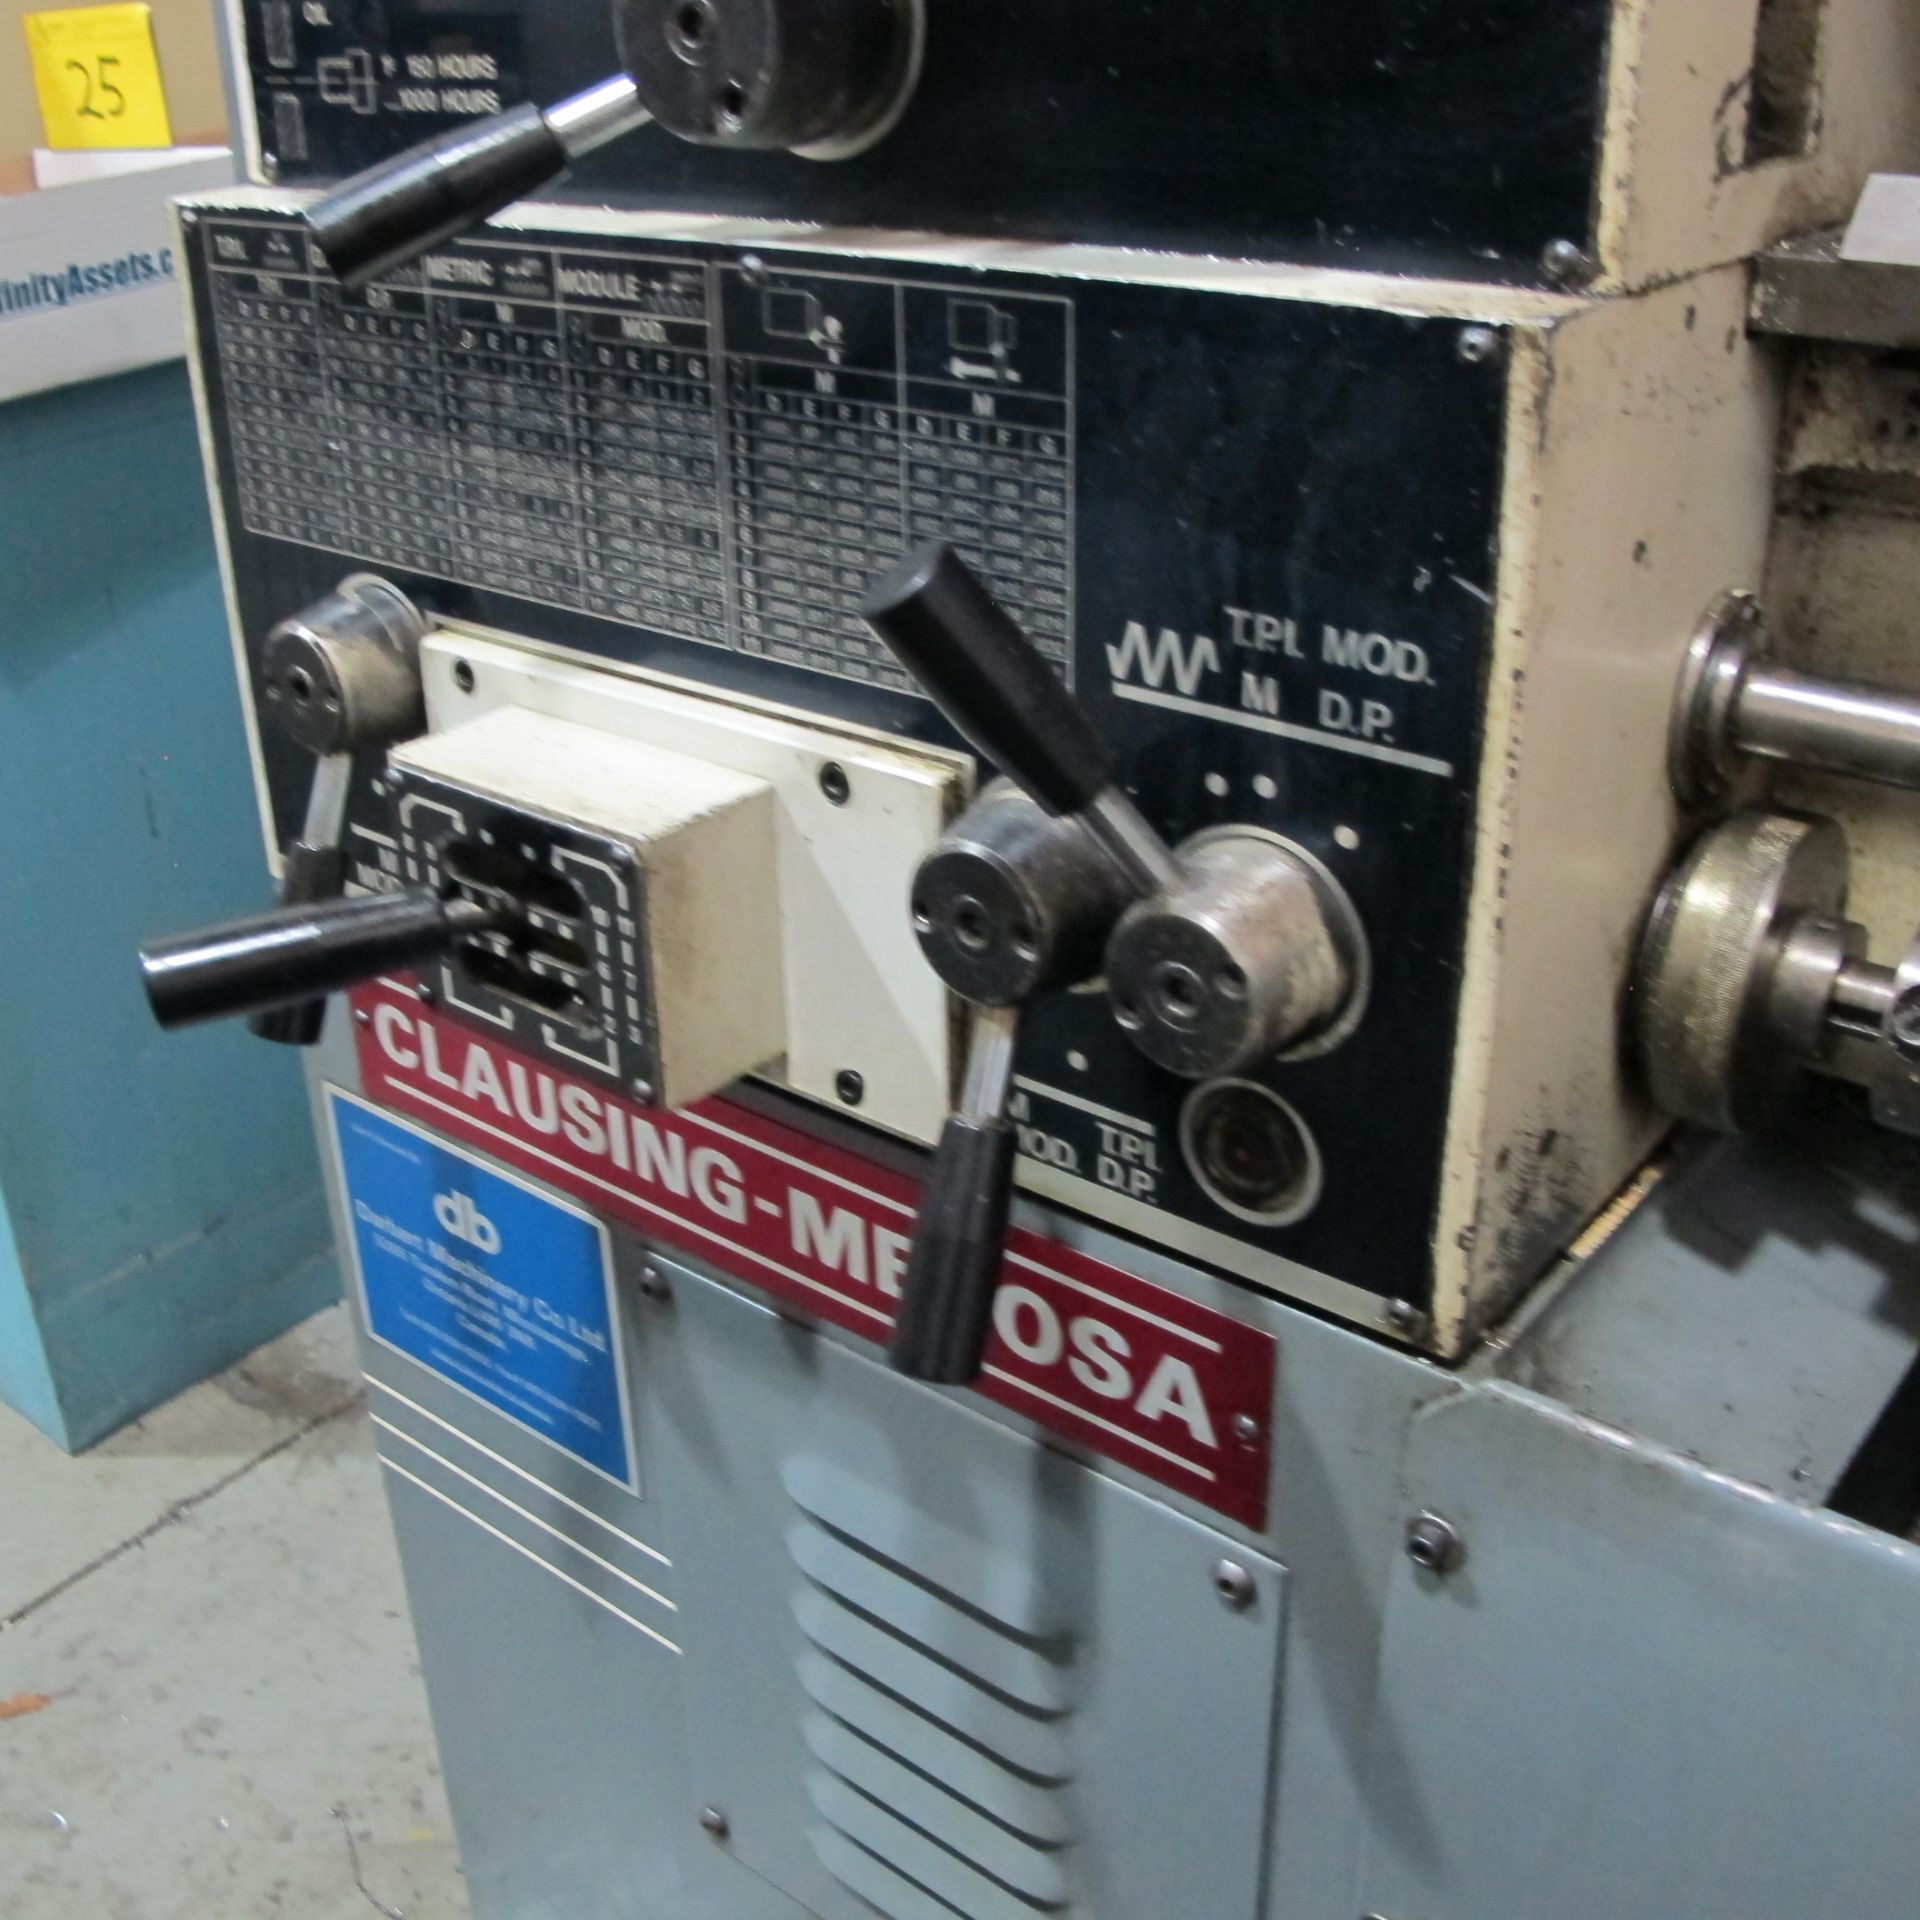 CLAUSING-METOSA C1430S LATHE, 8" 3-JAW CHUCK, ACURITE 2-AXIS DRO, 14” X 30”, SPEEDS TO 2,000 RPM, - Image 5 of 7